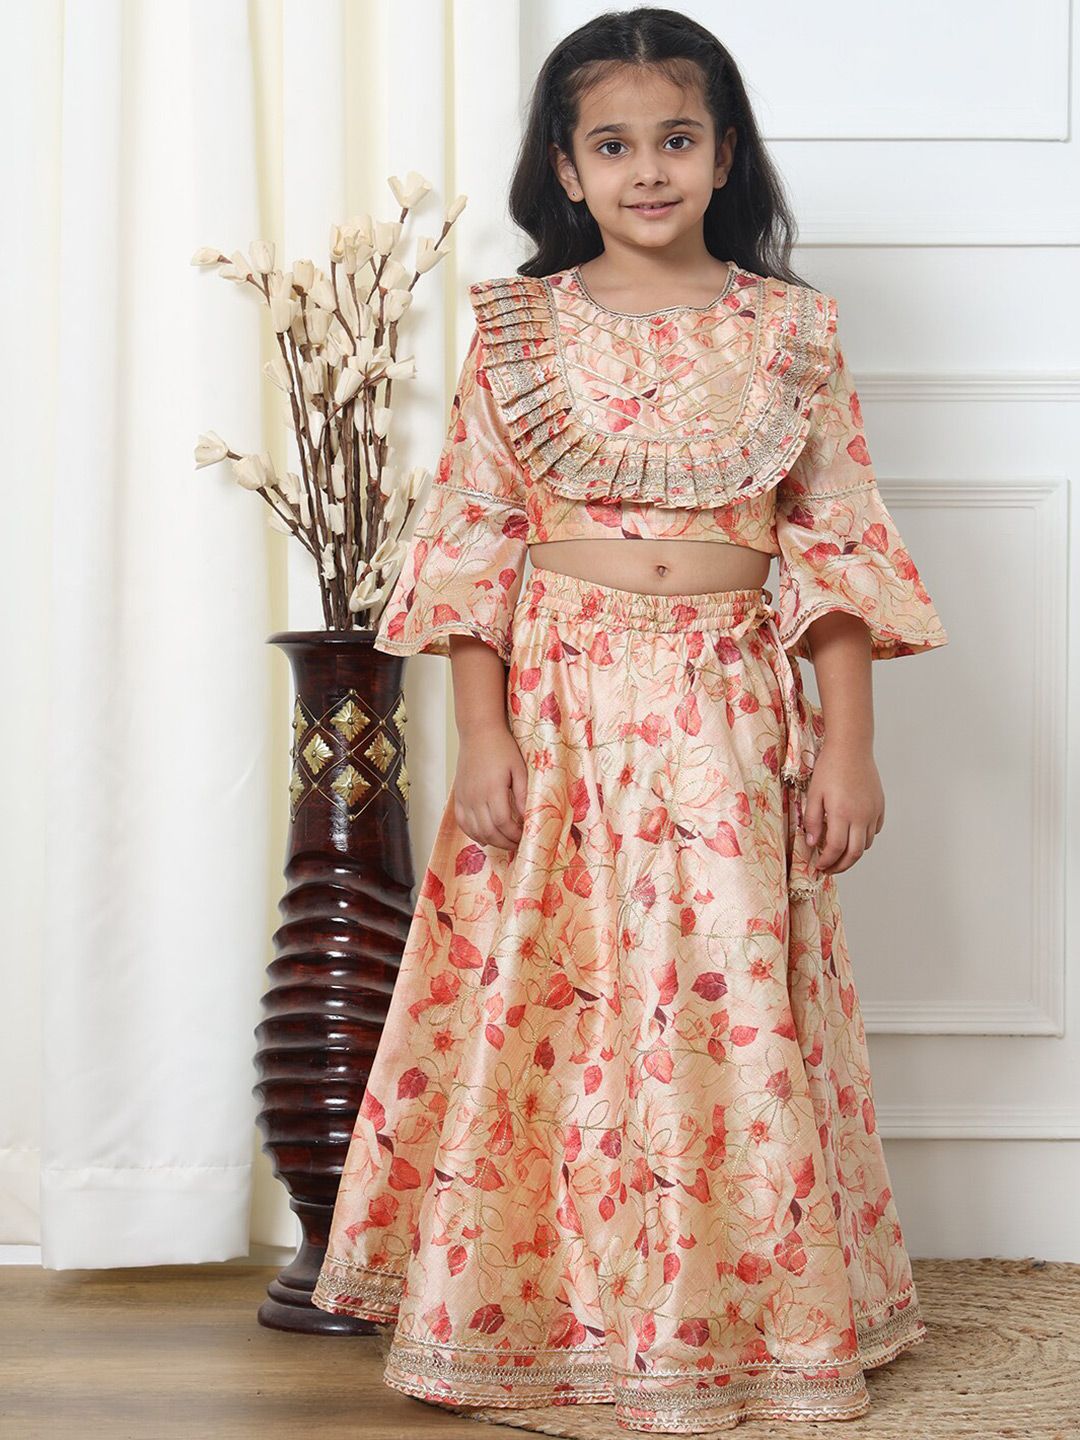 Readiprint Fashions Girls Floral Printed Ready to Wear Lehenga & Blouse Price in India